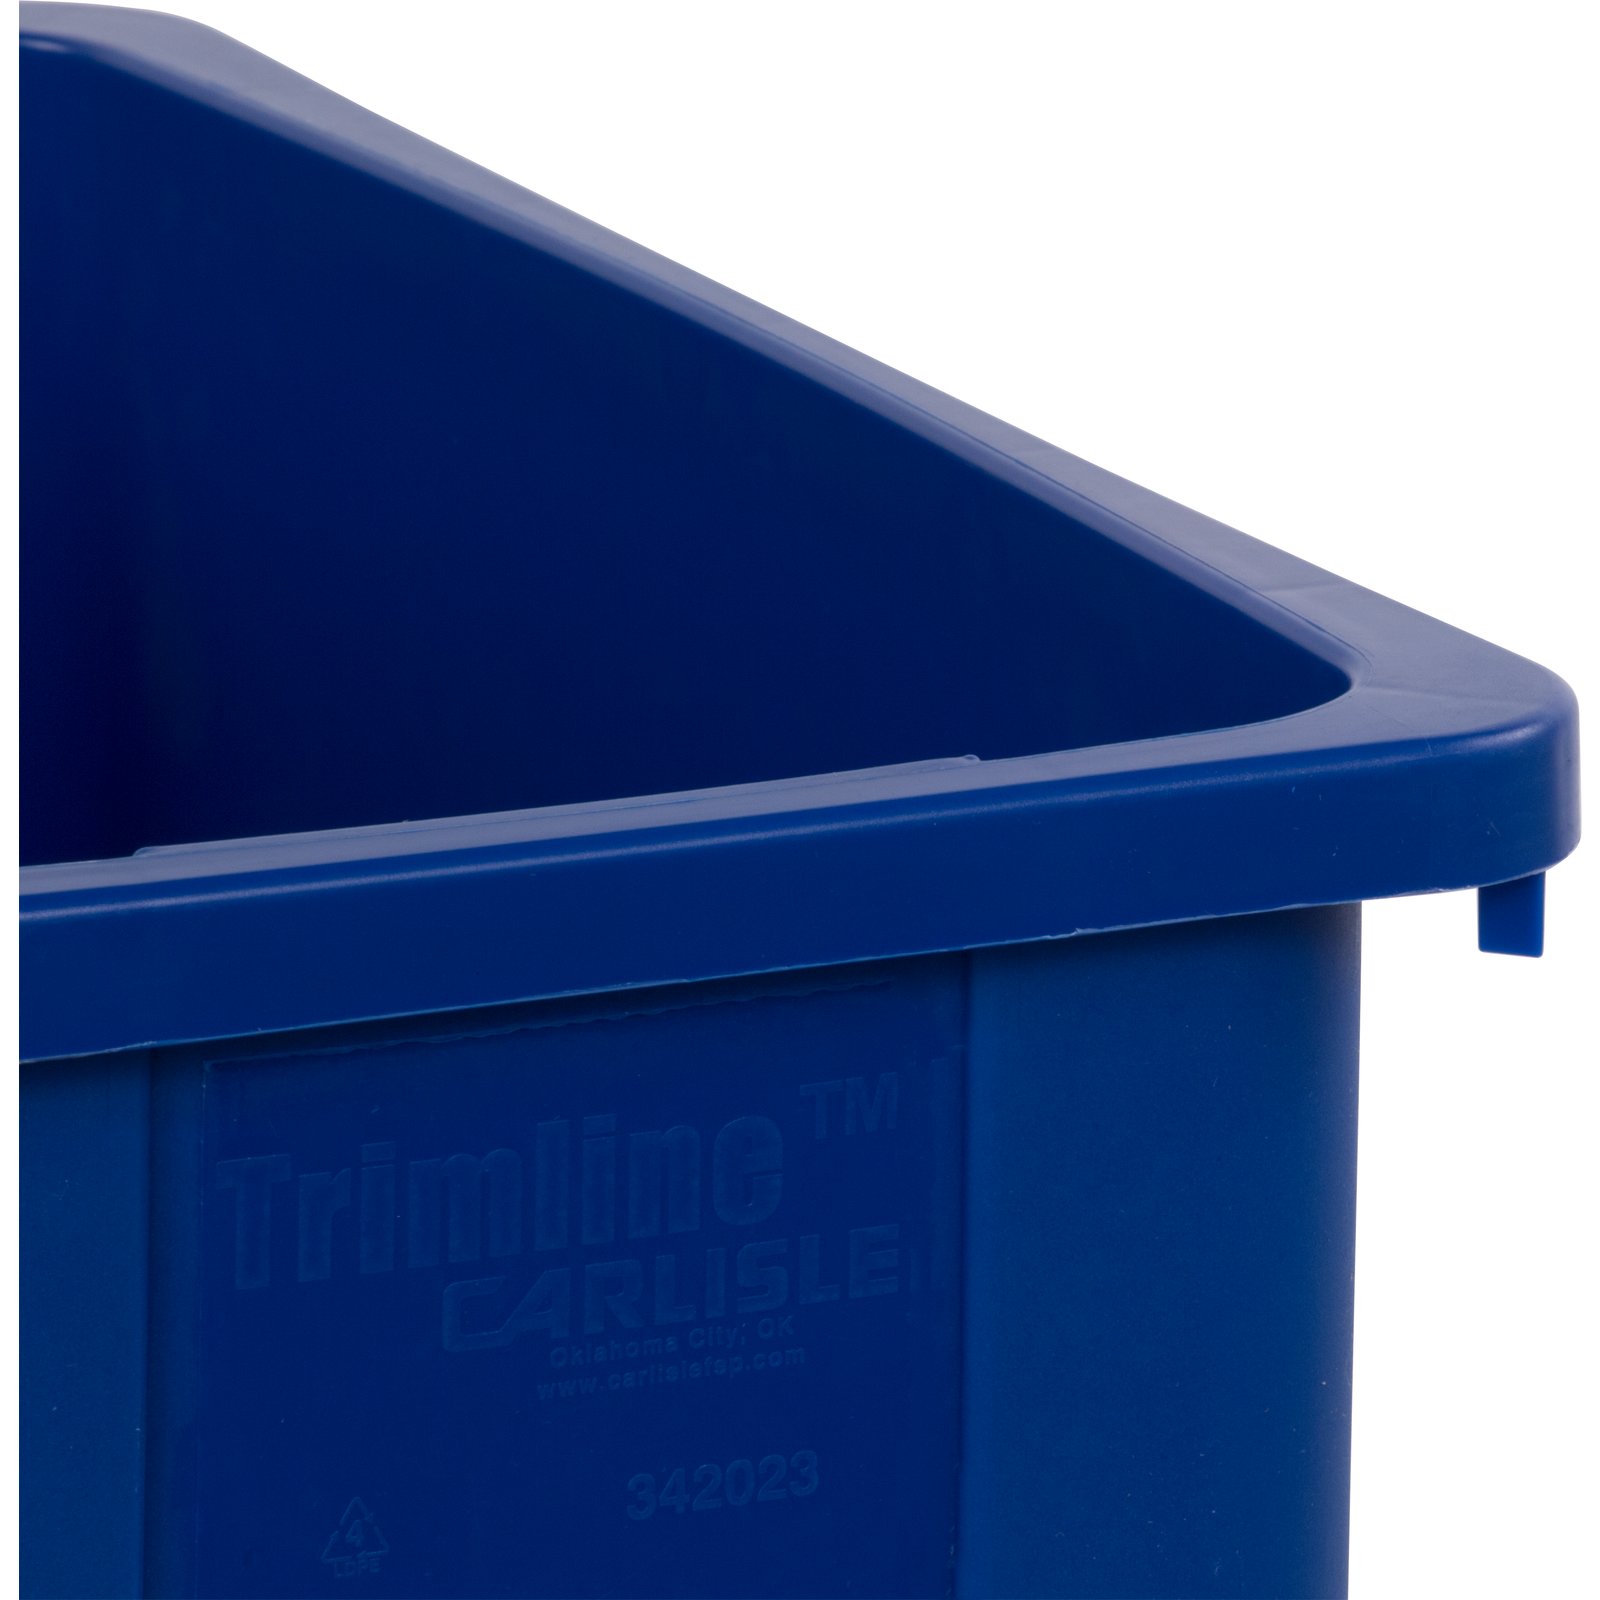 34202314 - TrimLine™ Rectangle Waste Container 23 Gallon - Blue